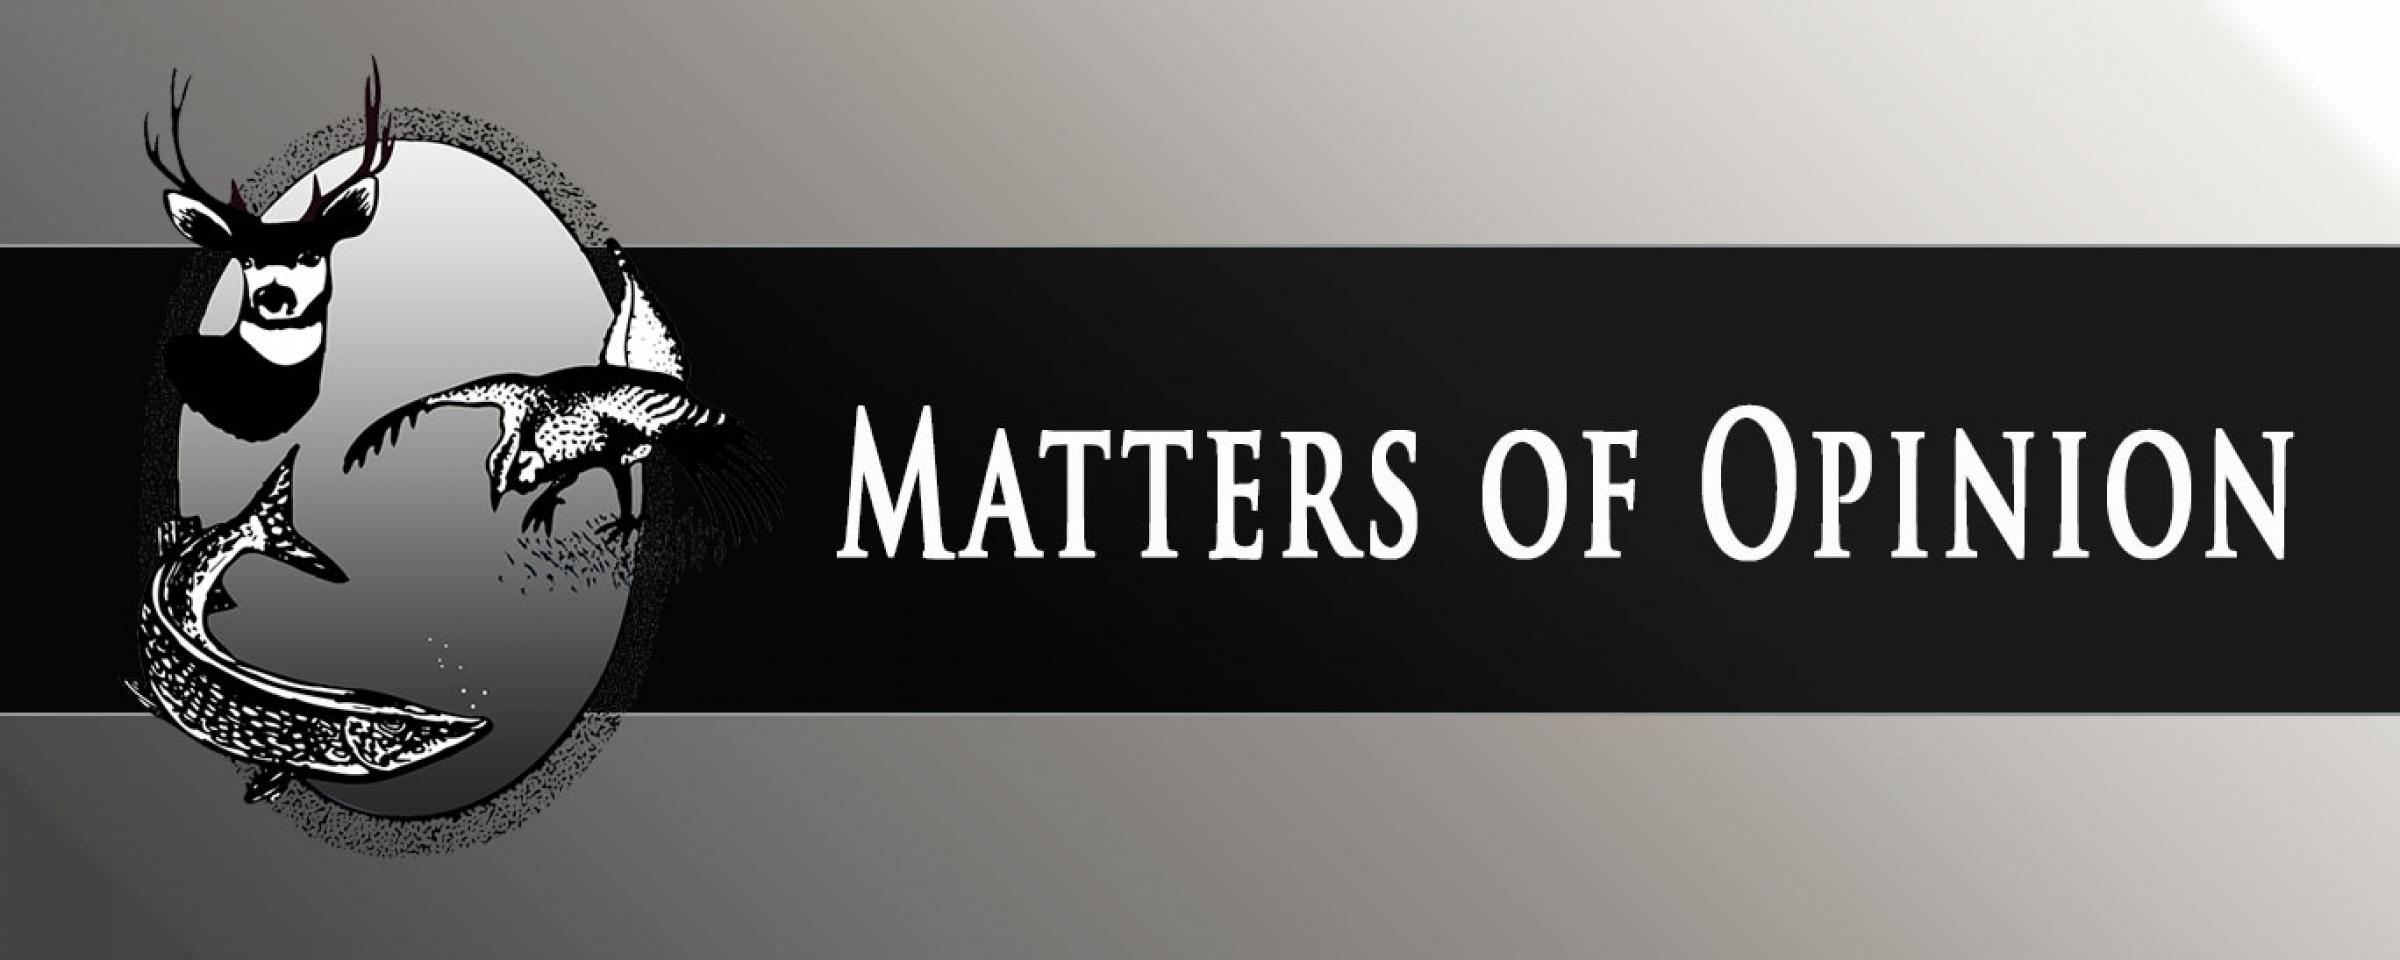 Matters of Opinion Header Graphic